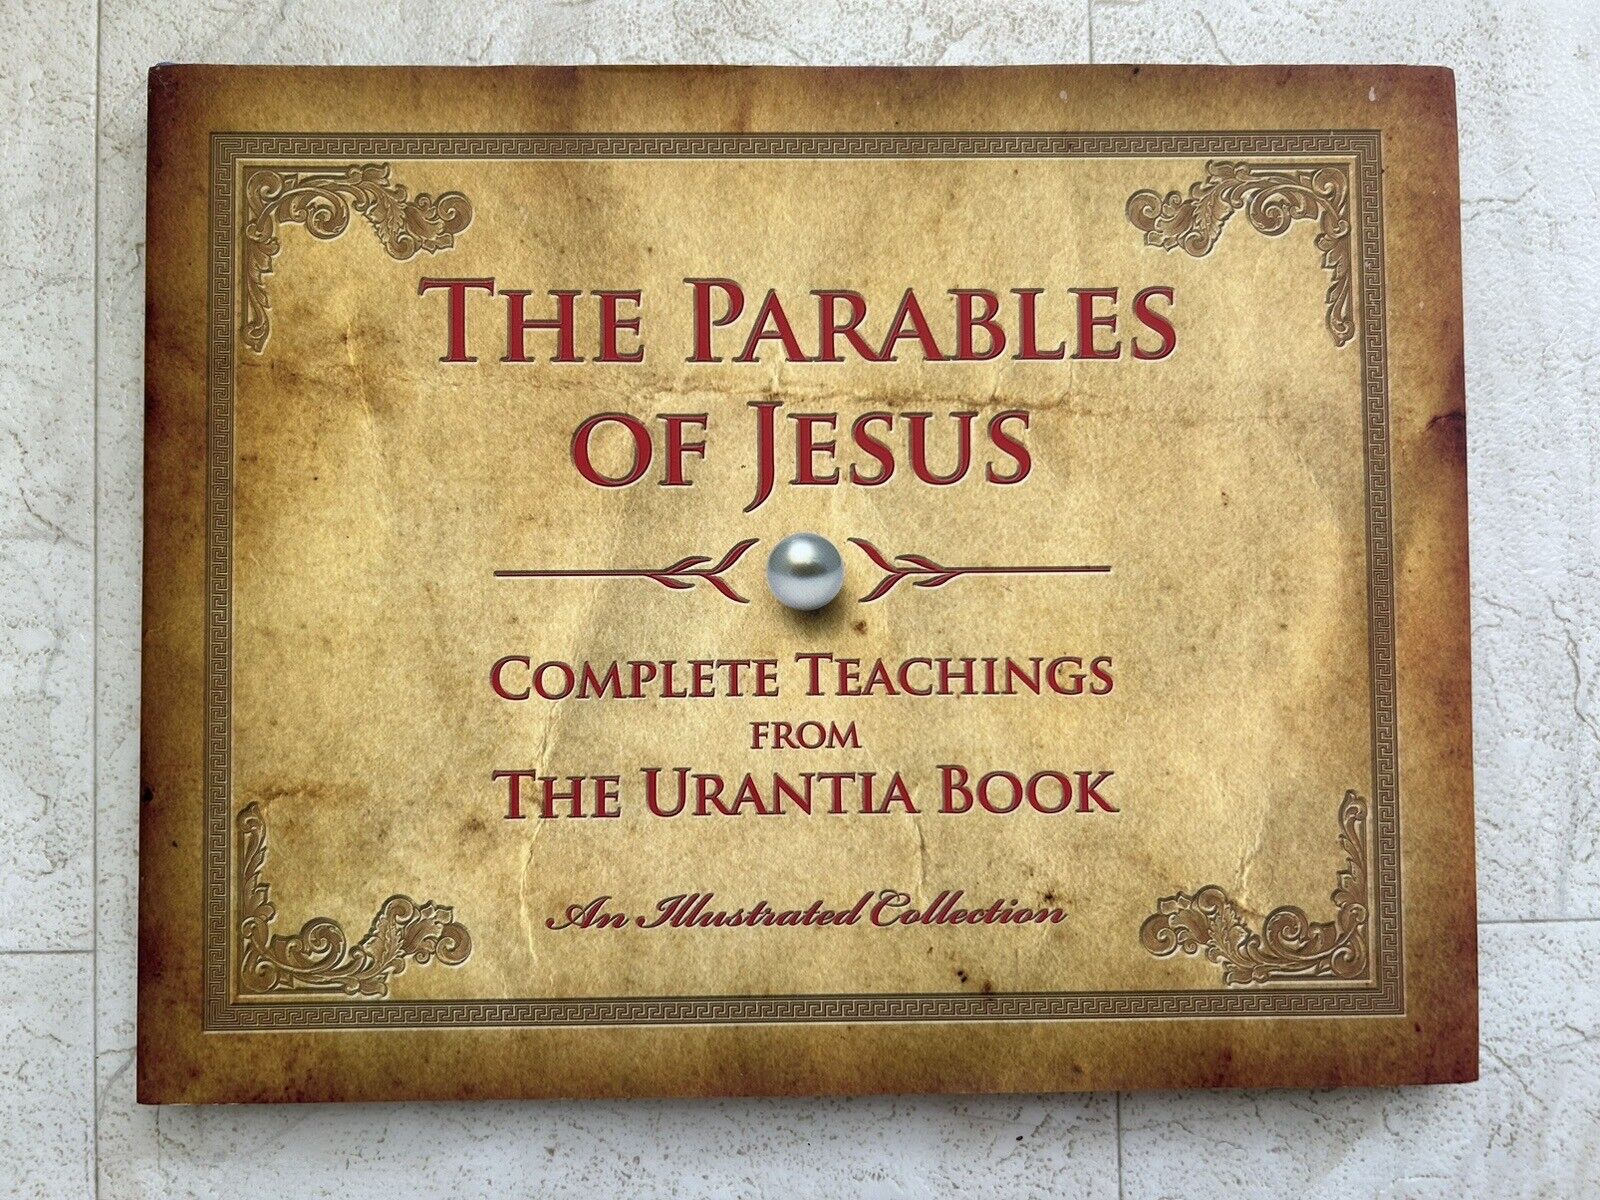 THE PARABLES OF JESUS- THE COMPLETE TEACHINGS FROM THE URANTIA BOOK- Illustrated